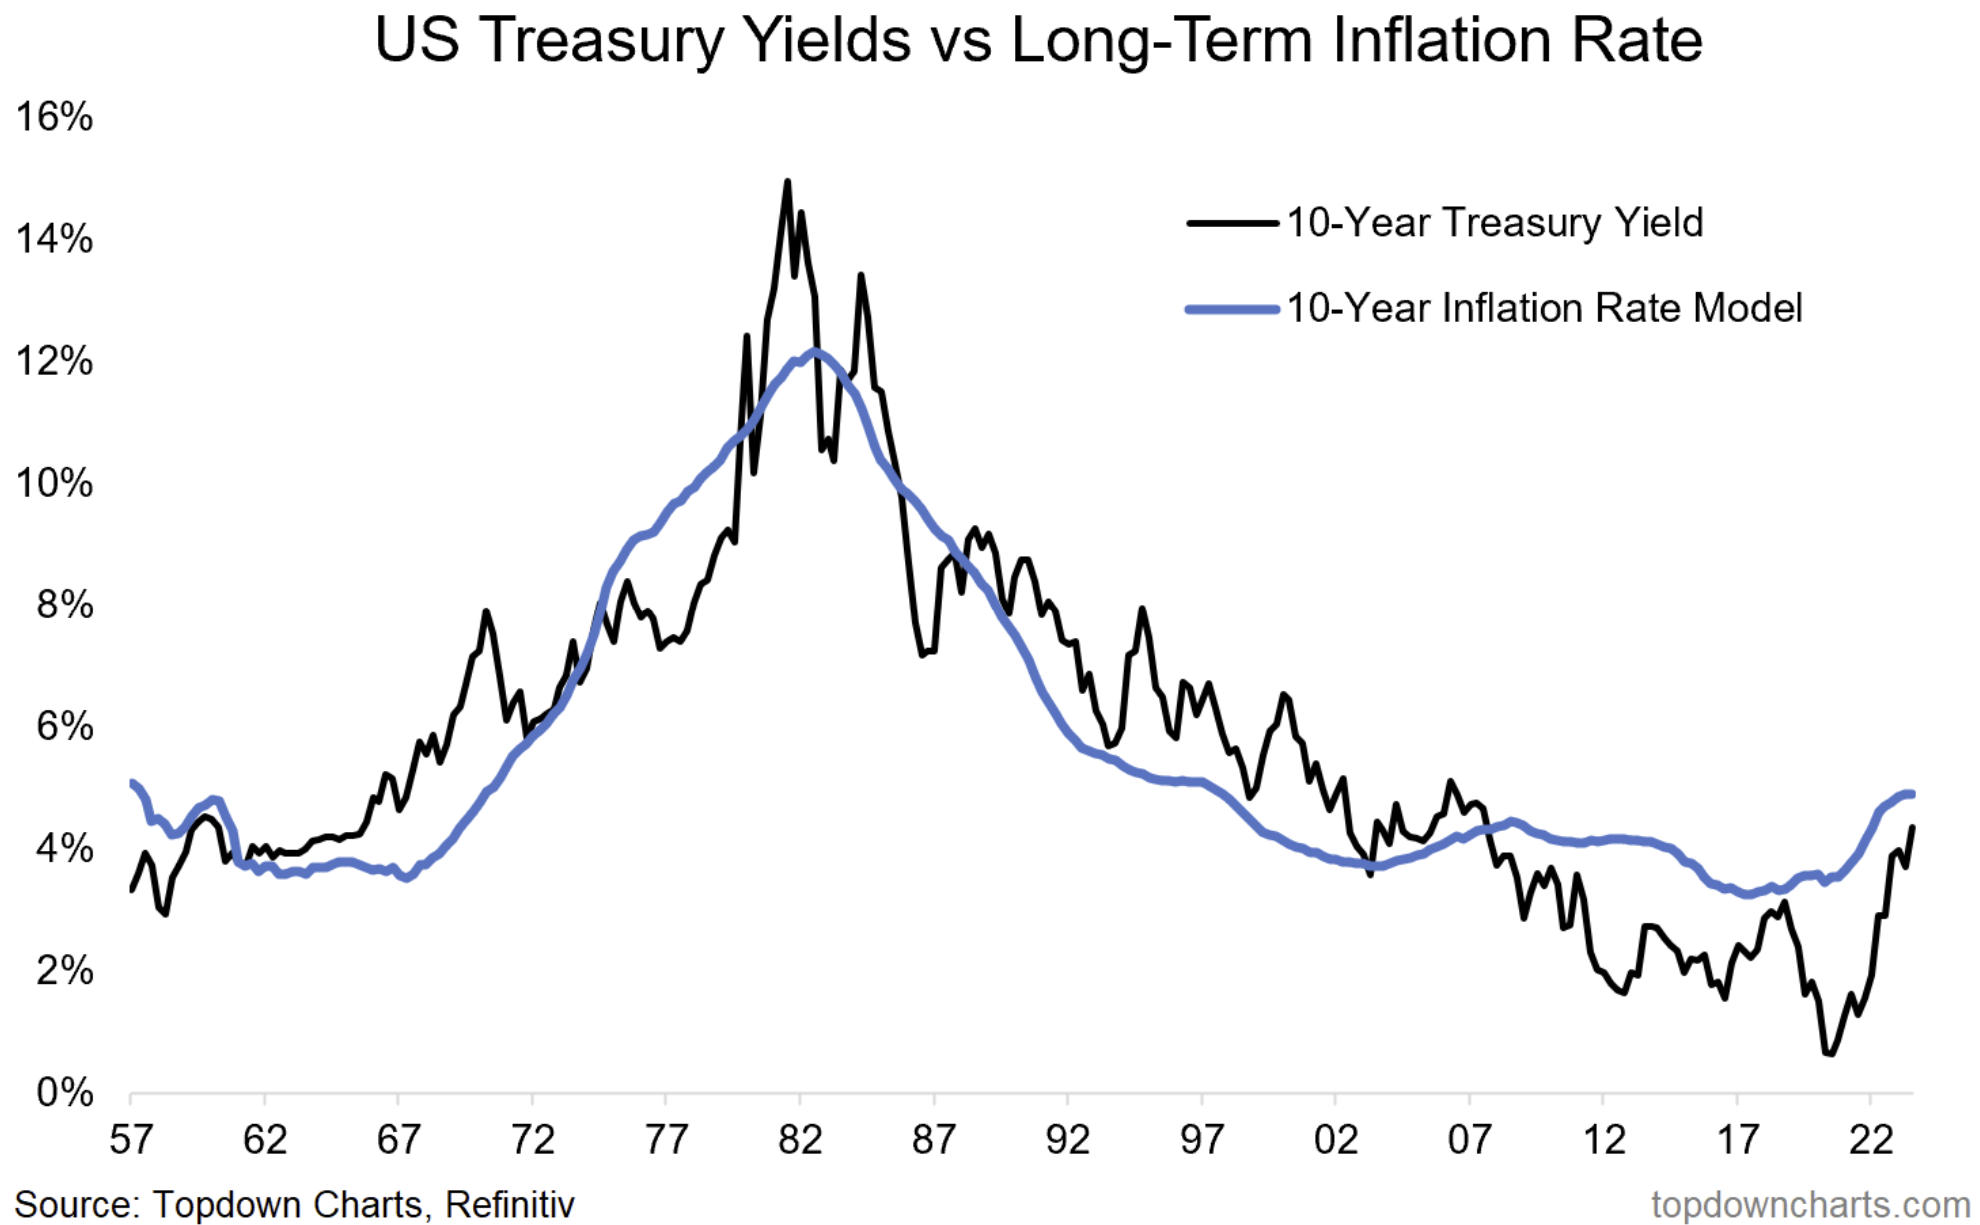 Chart shows the long-term rate of inflation model and US 10-year treasury yields